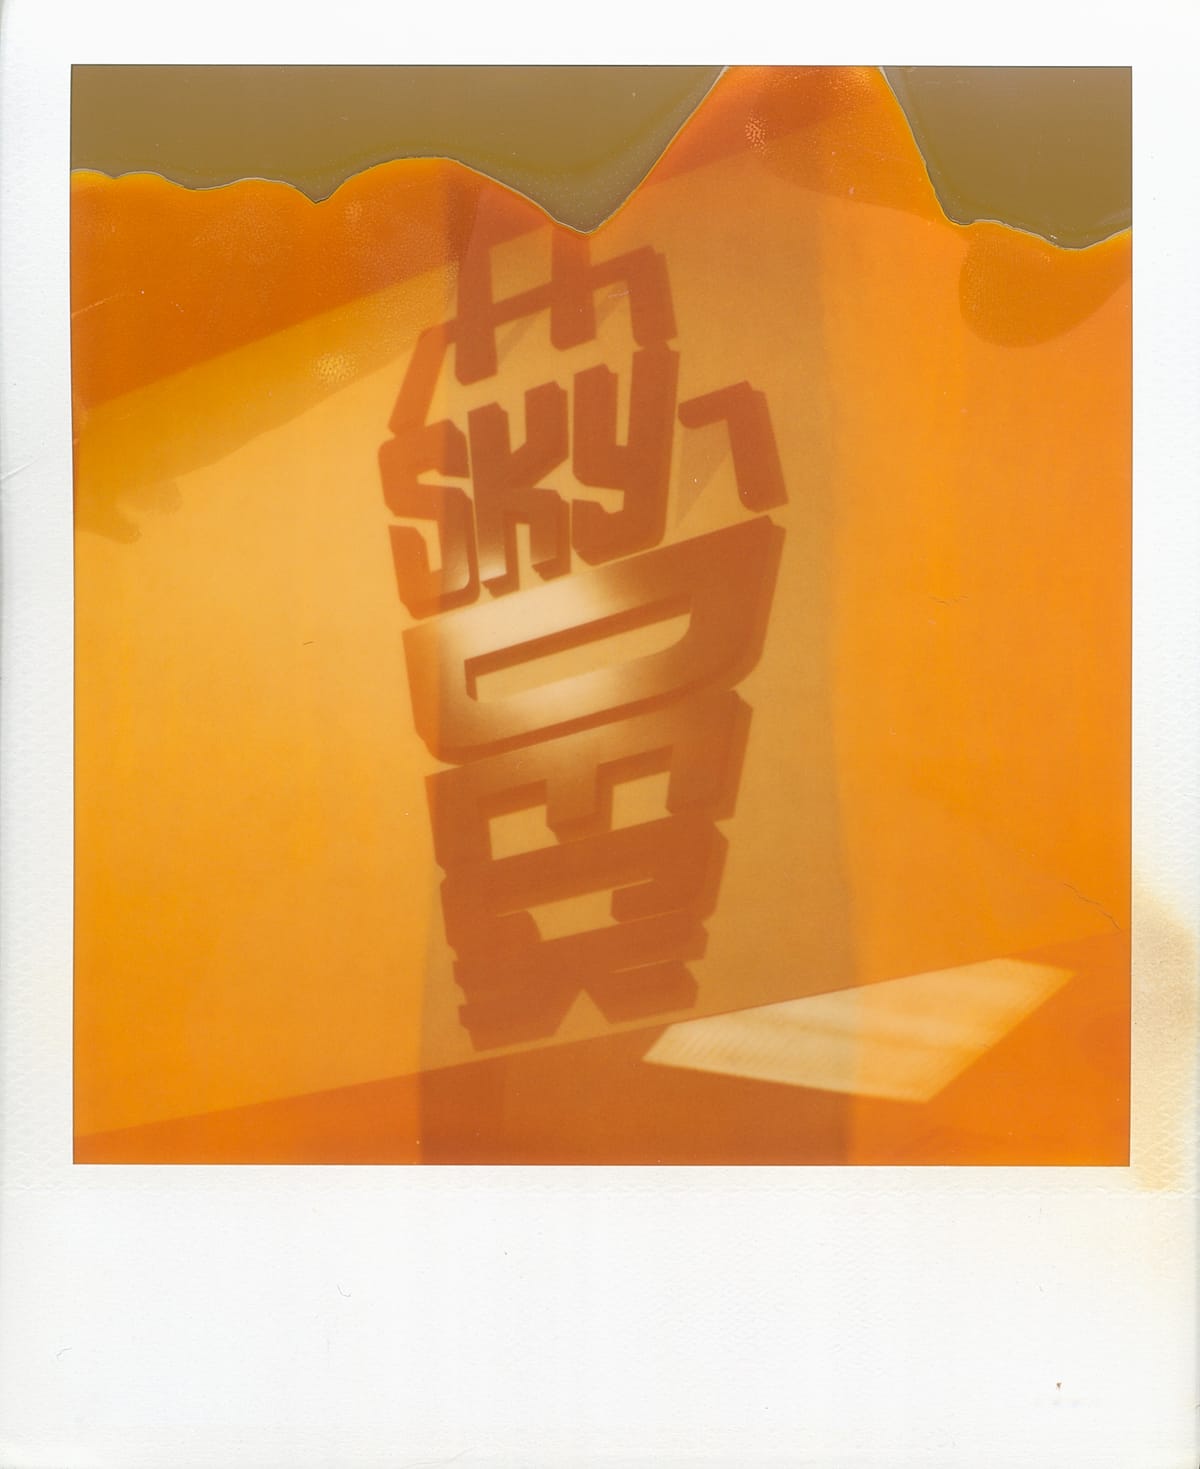 Scan of expired Polaroid film photo of the Sears Tower SkyDeck logo (Chicago, IL)